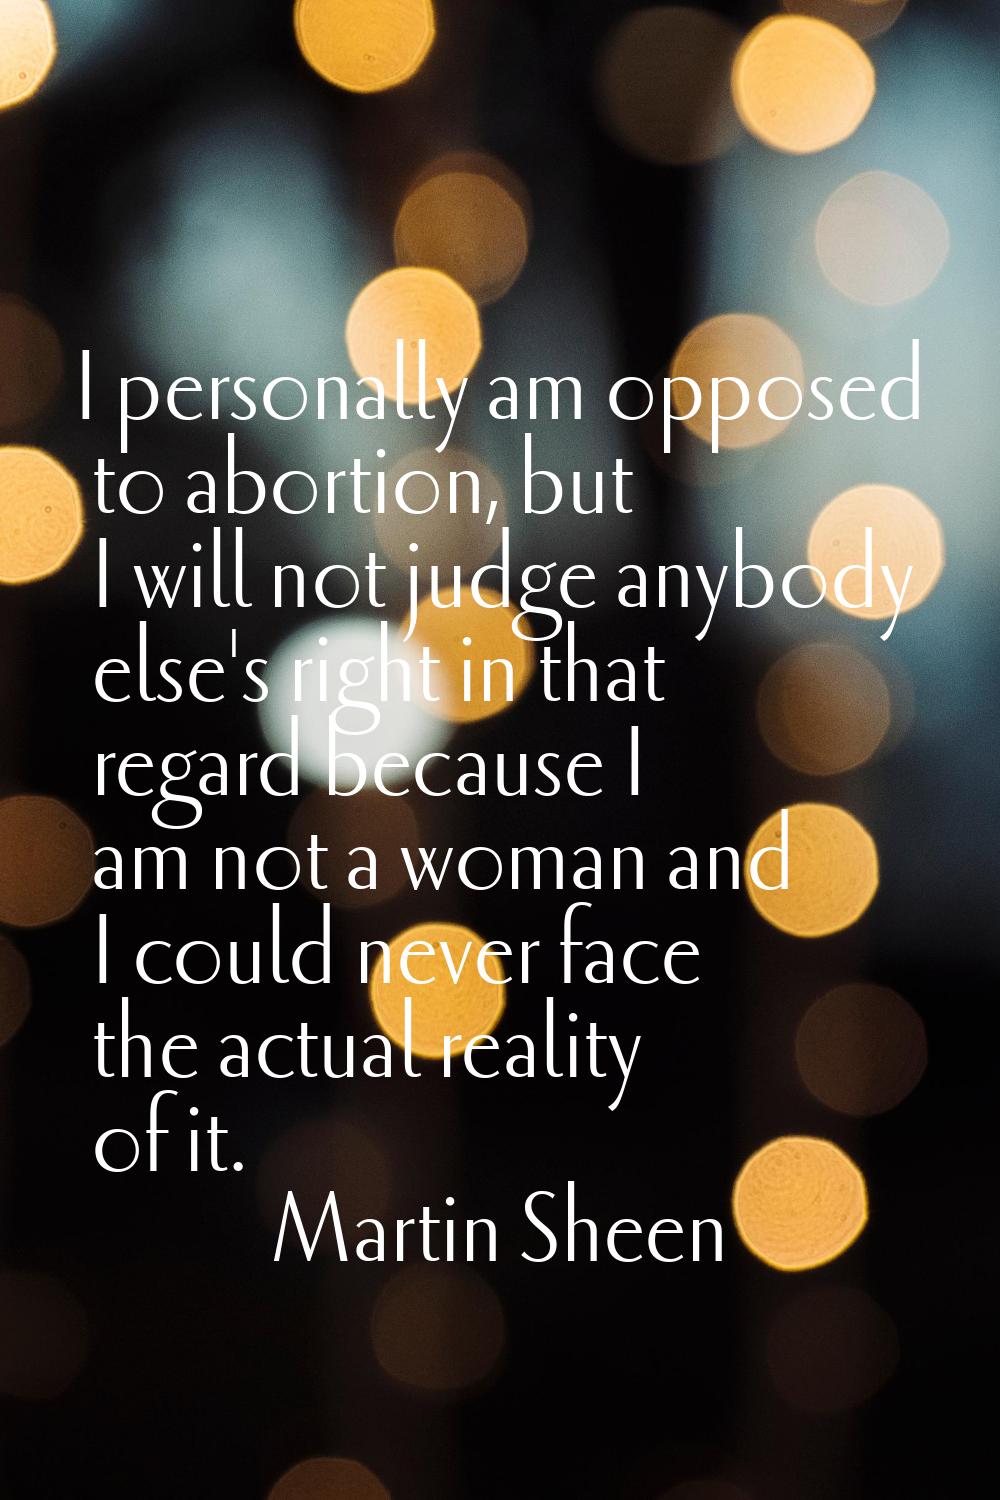 I personally am opposed to abortion, but I will not judge anybody else's right in that regard becau